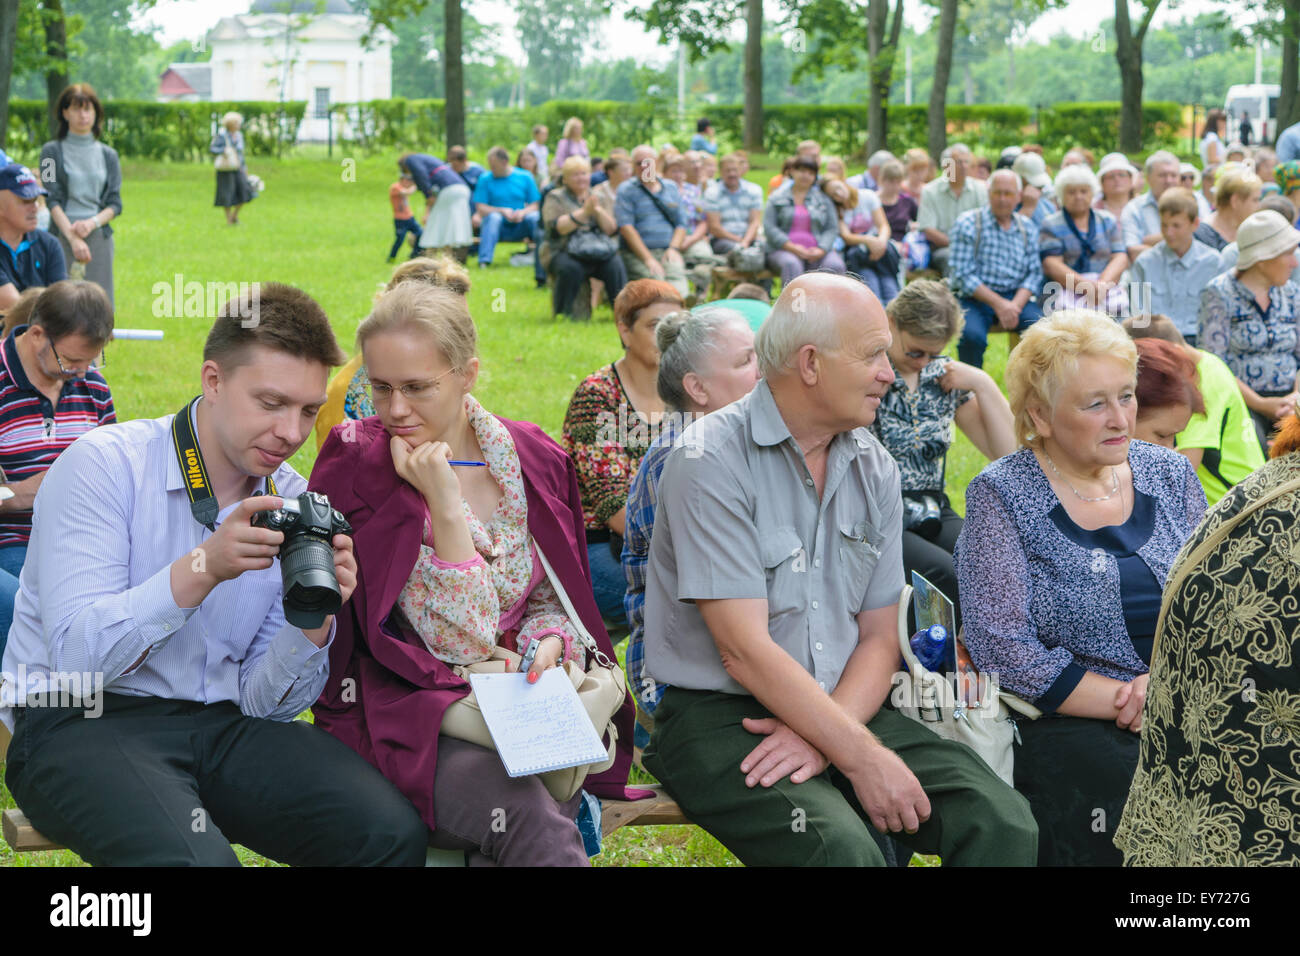 OREL, RUSSIA - JUNE 27, 2015: The guy with the girl with interest viewing images on the camera Nikon made at public event at the museum-estate Ivan Turgenev 'Spasskoye Lutovinovo' Stock Photo